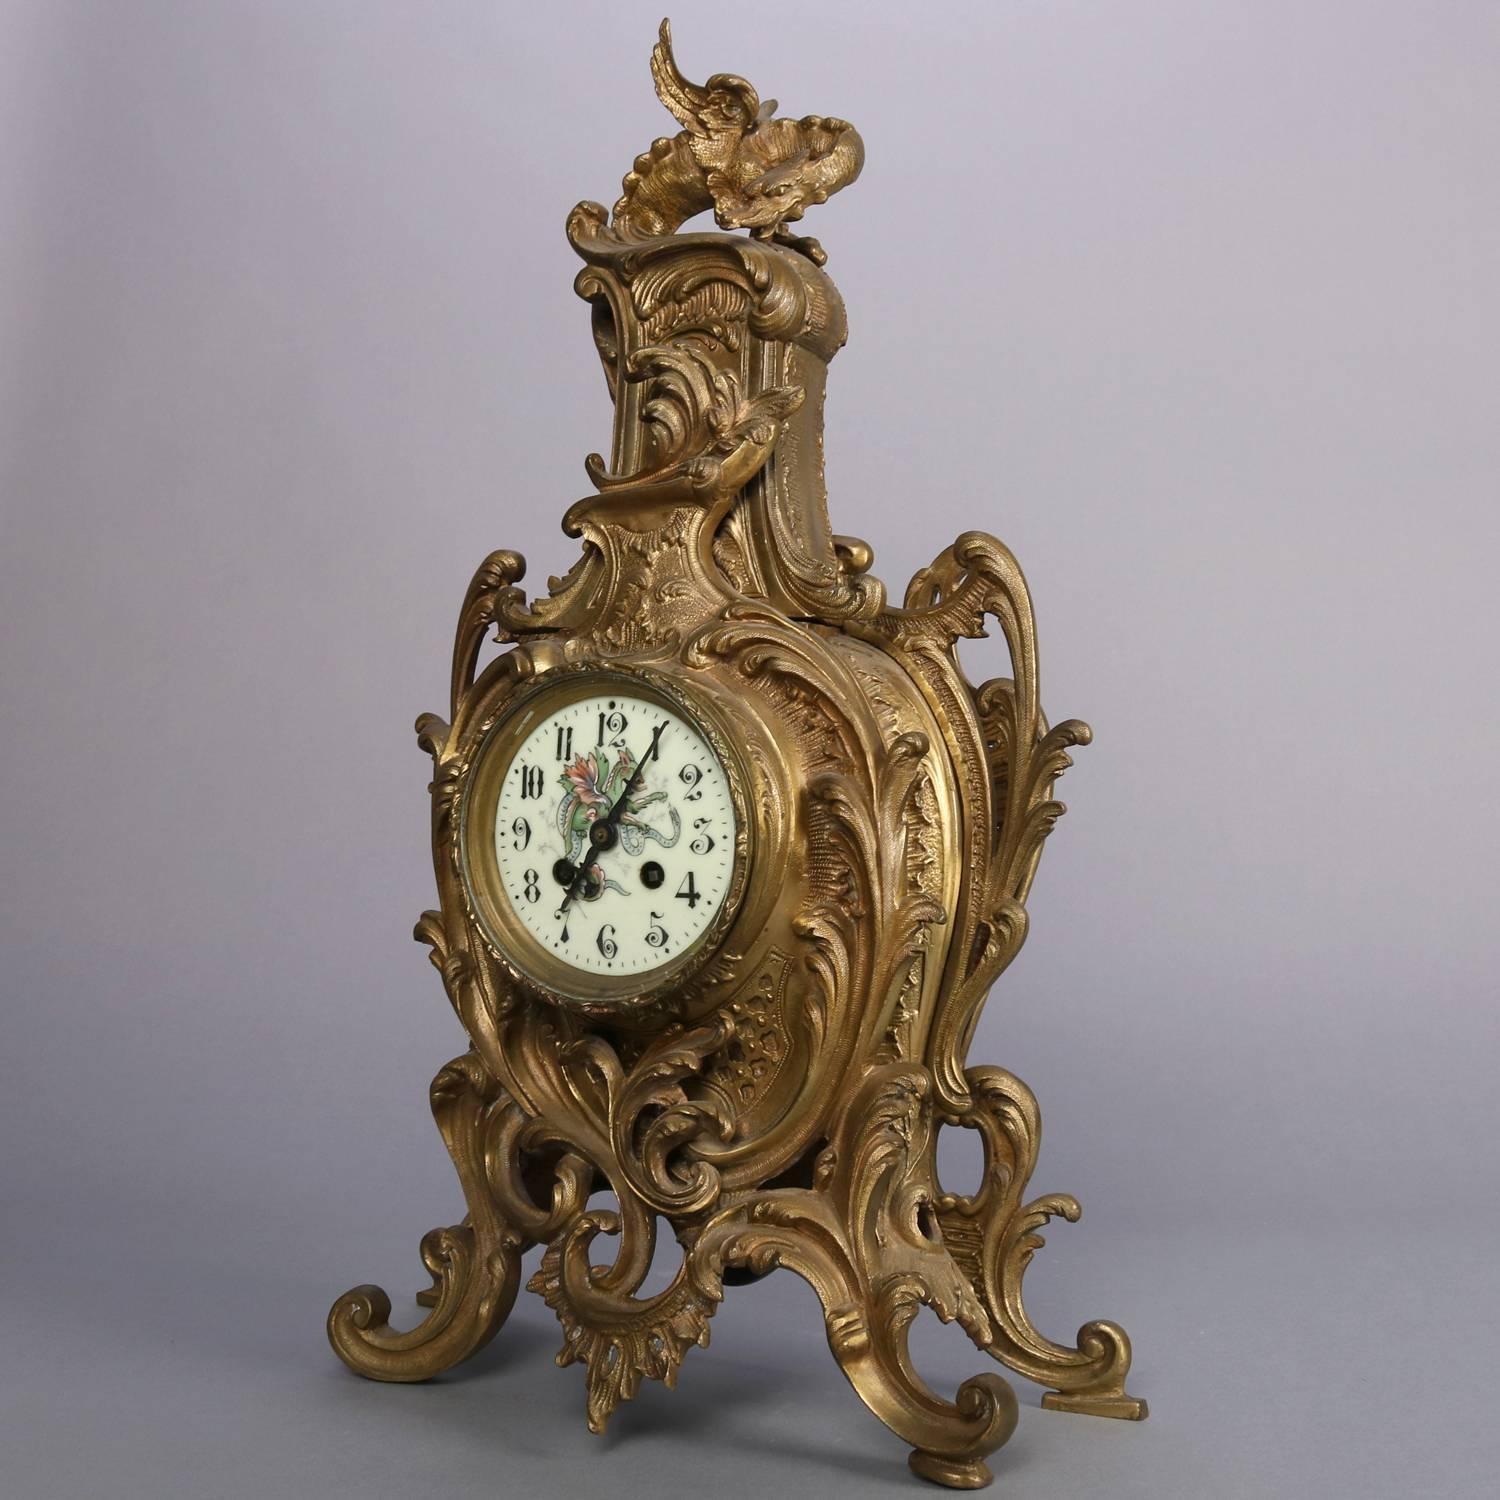 Antique French A D Mougin of Paris France, Rococo style mantel clock features pierced bronze case with scrolled acanthus overall and mythical winged dragon finial, porcelain face with hand painted winged dragon in victory over serpent, works stamped